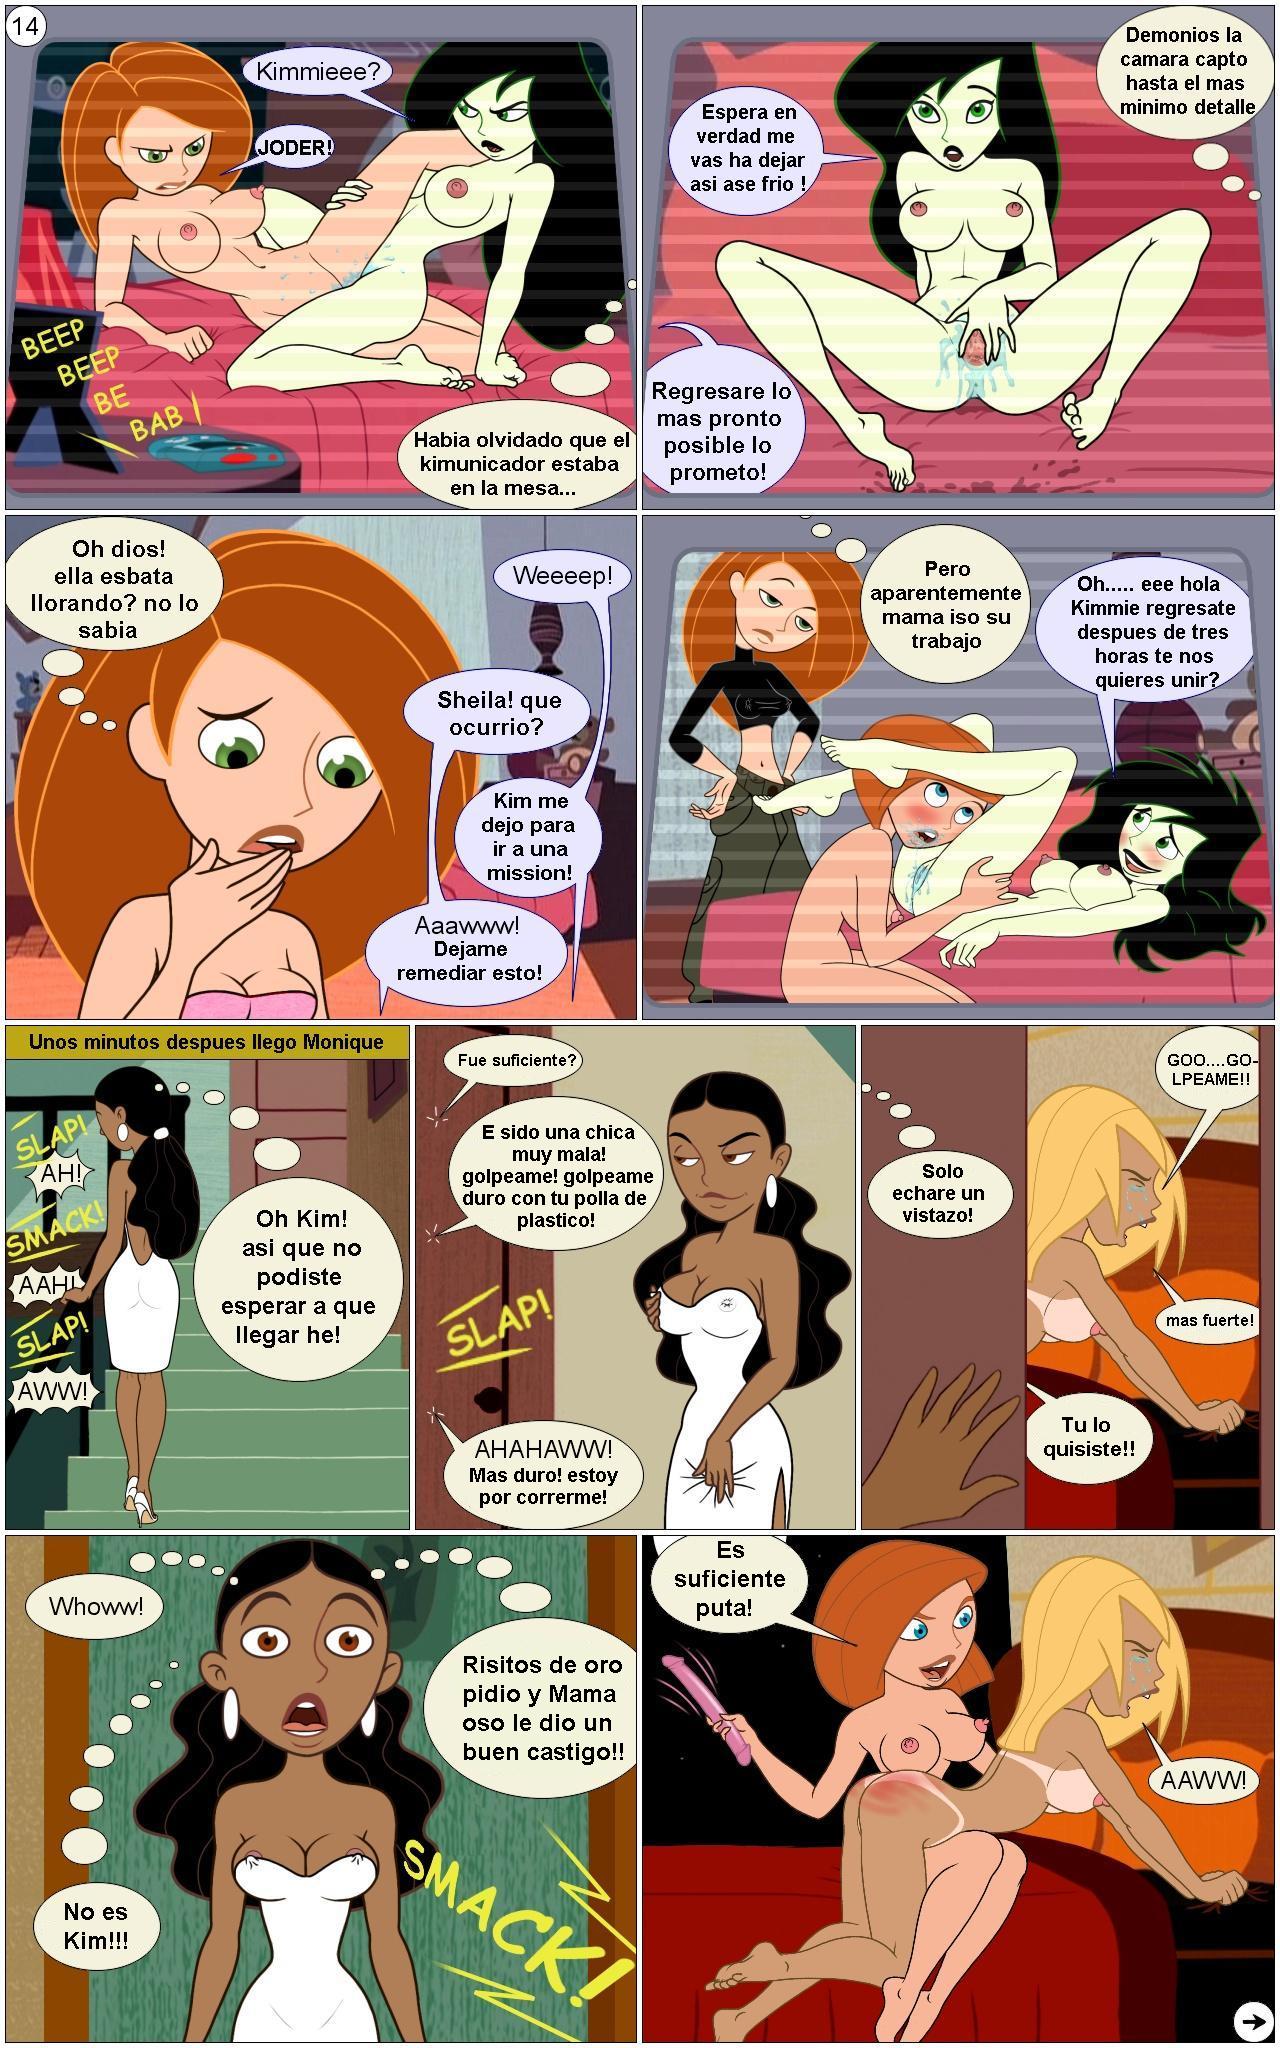 [Gagala] Oh, Betty! - Or: How to Seduce a Female Secret Agent (Kim Possible) [Spanish] 